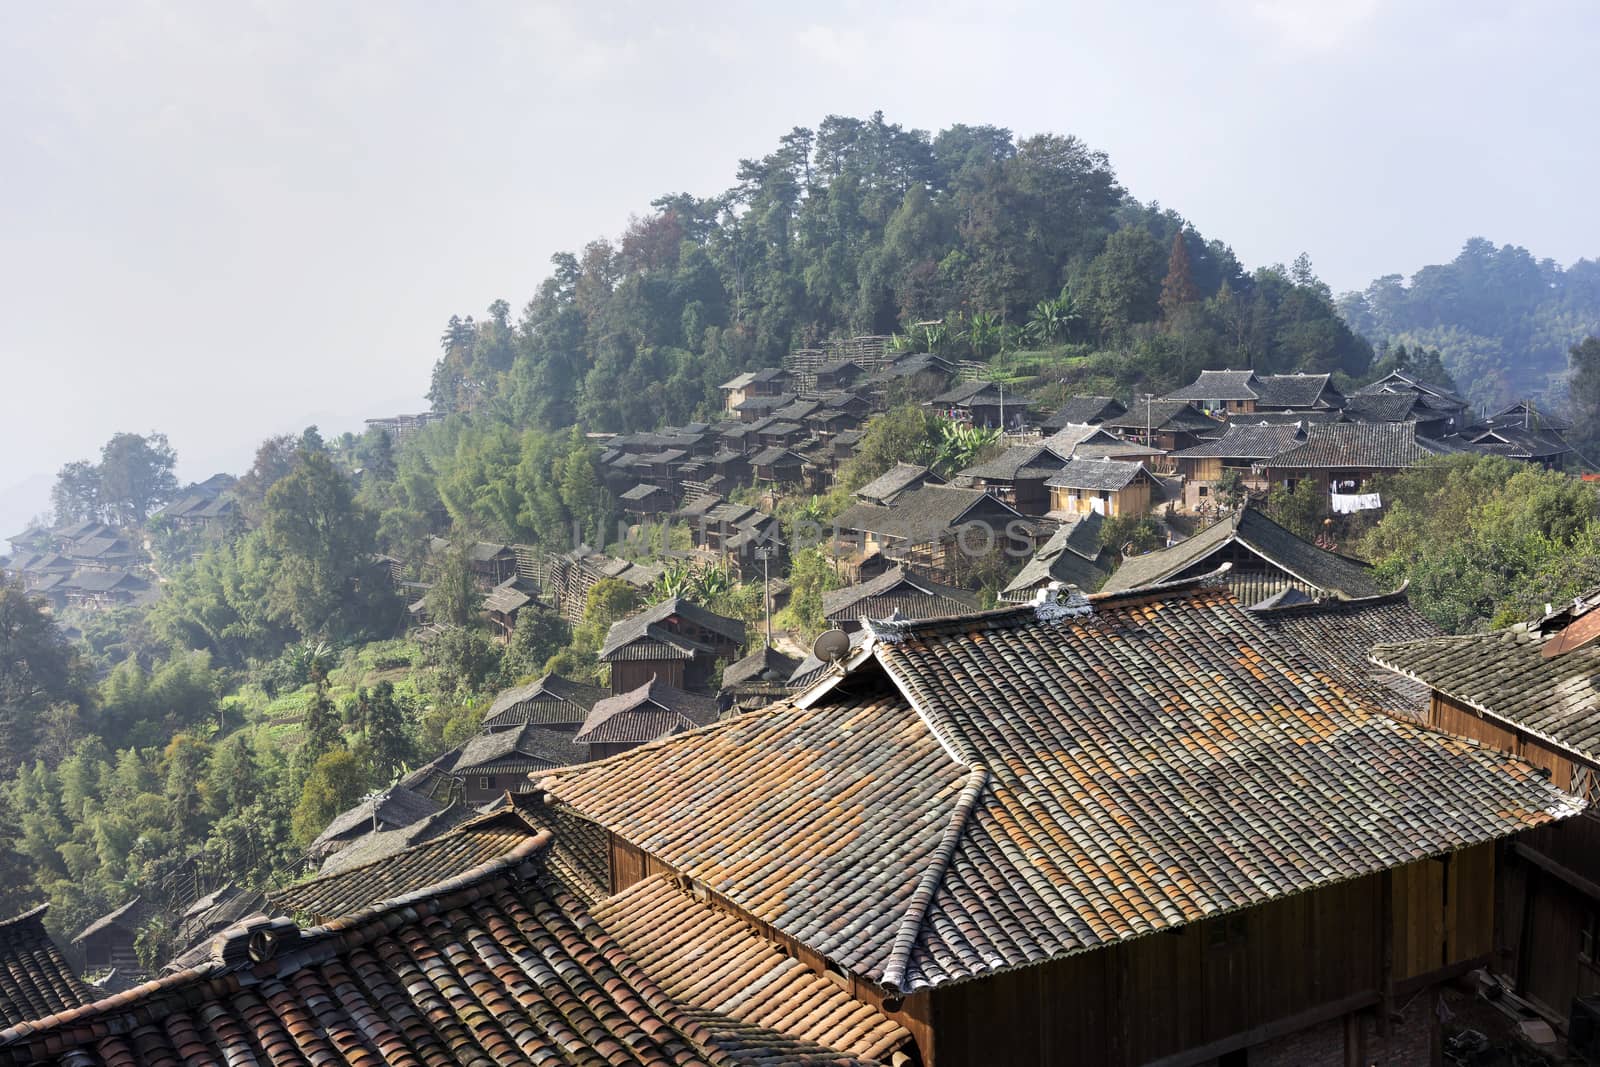 Remote Village Rooftop View - Terrace over the Horizon by leieng